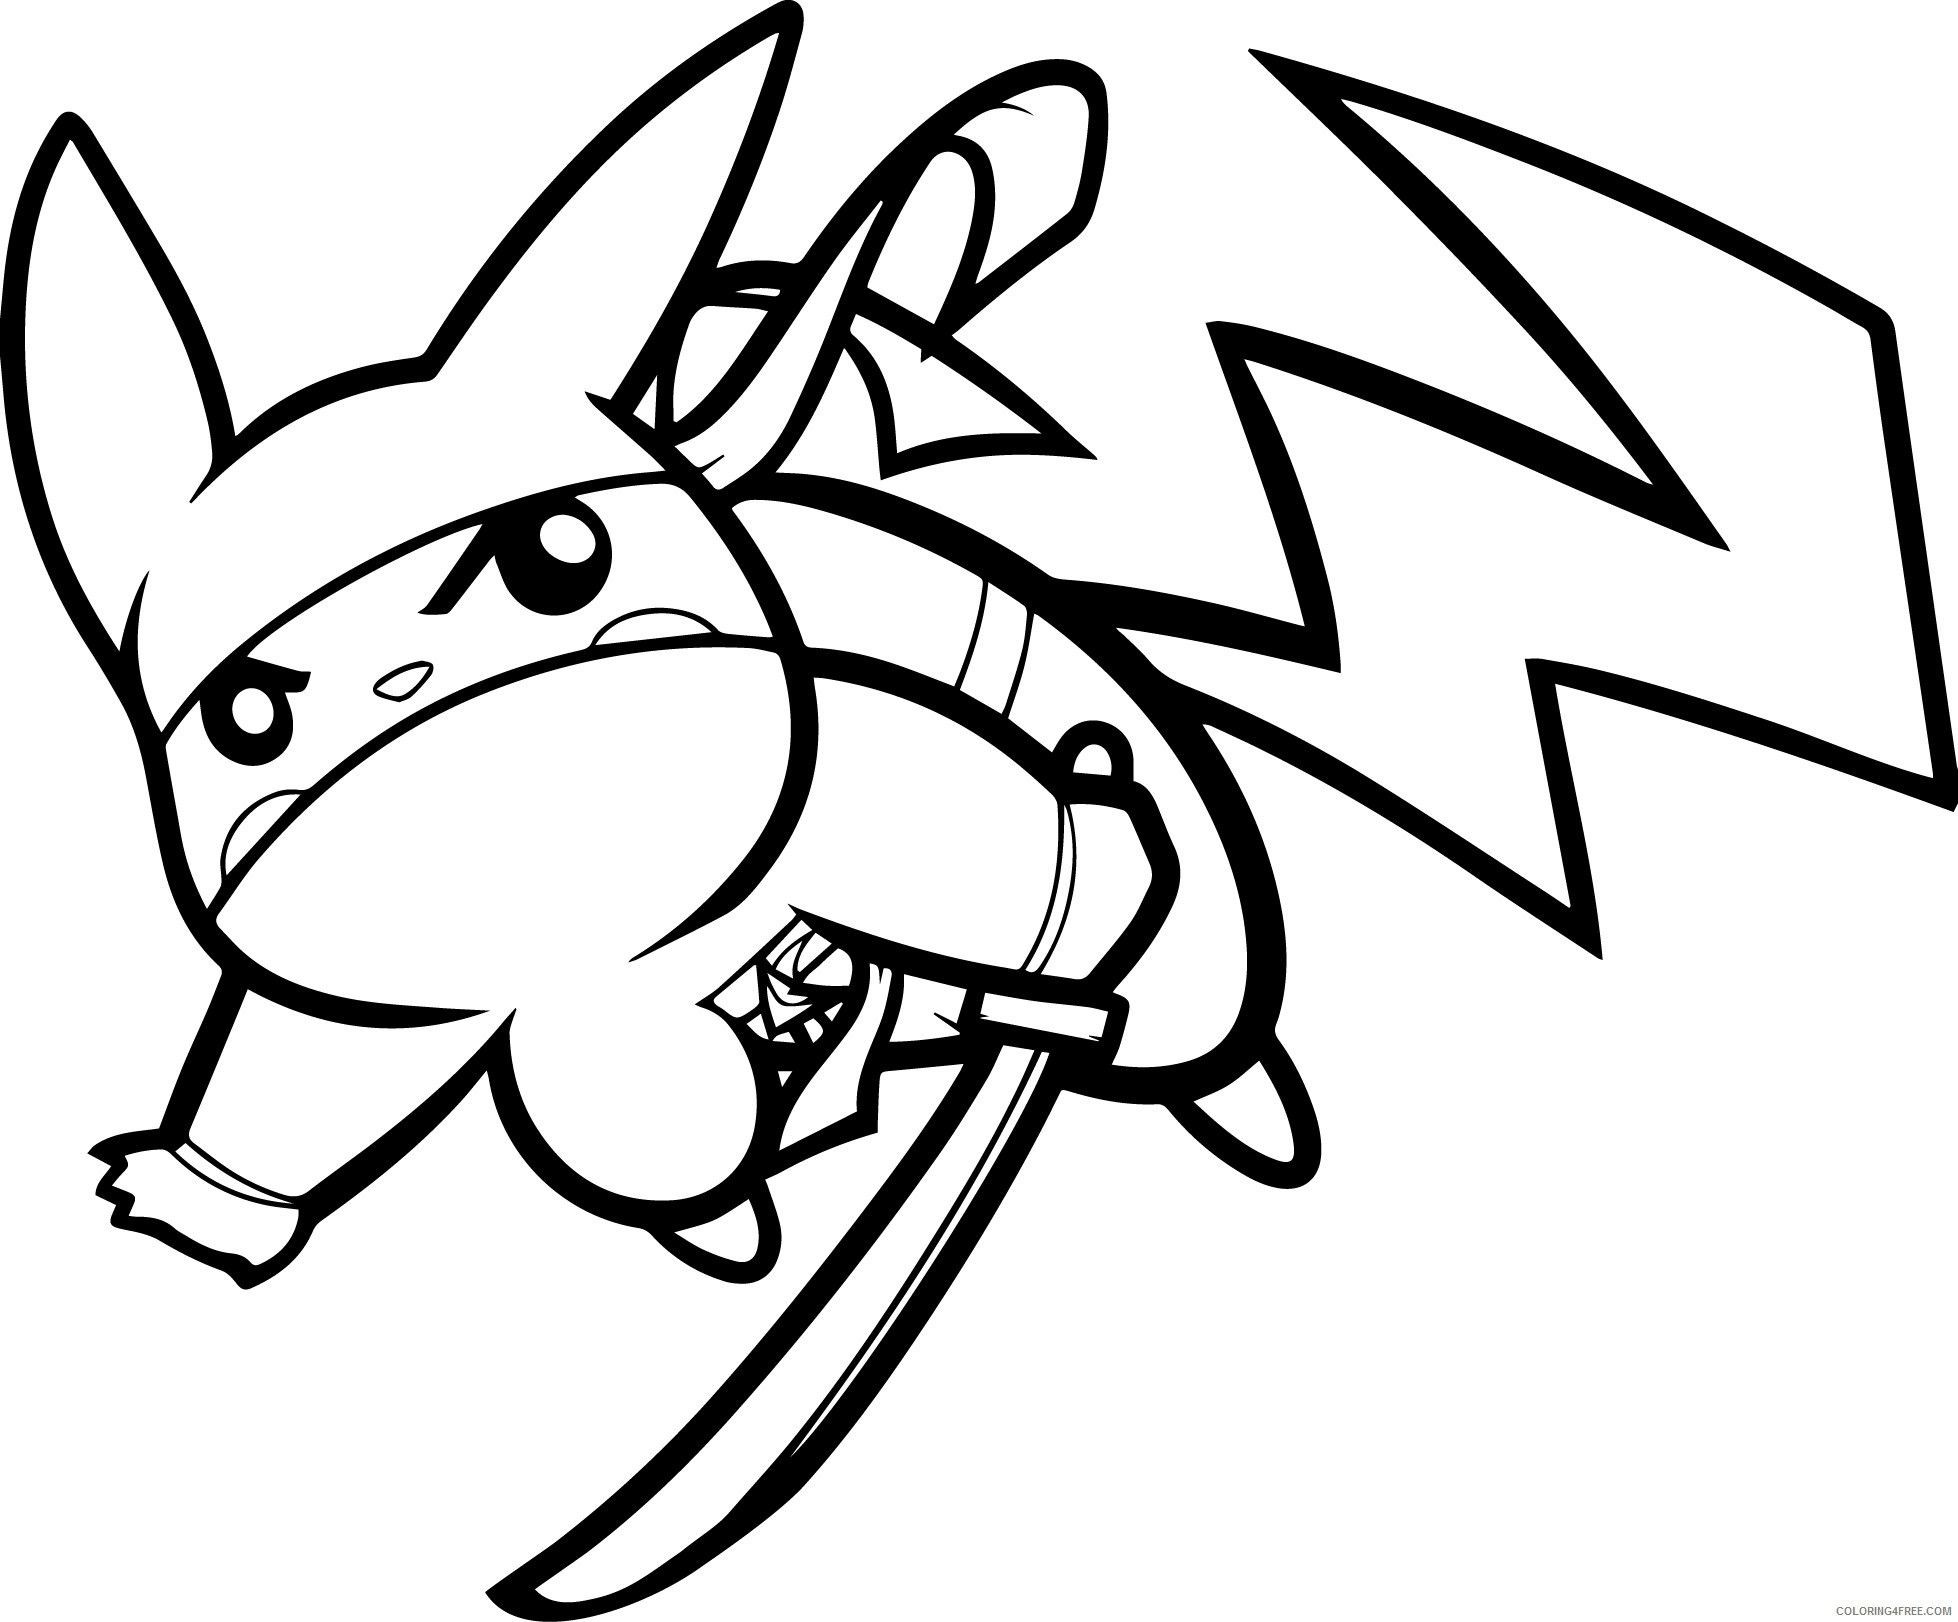 Ninja Coloring Pages
 Pikachu Ninja Coloring Page – From the thousands of photos